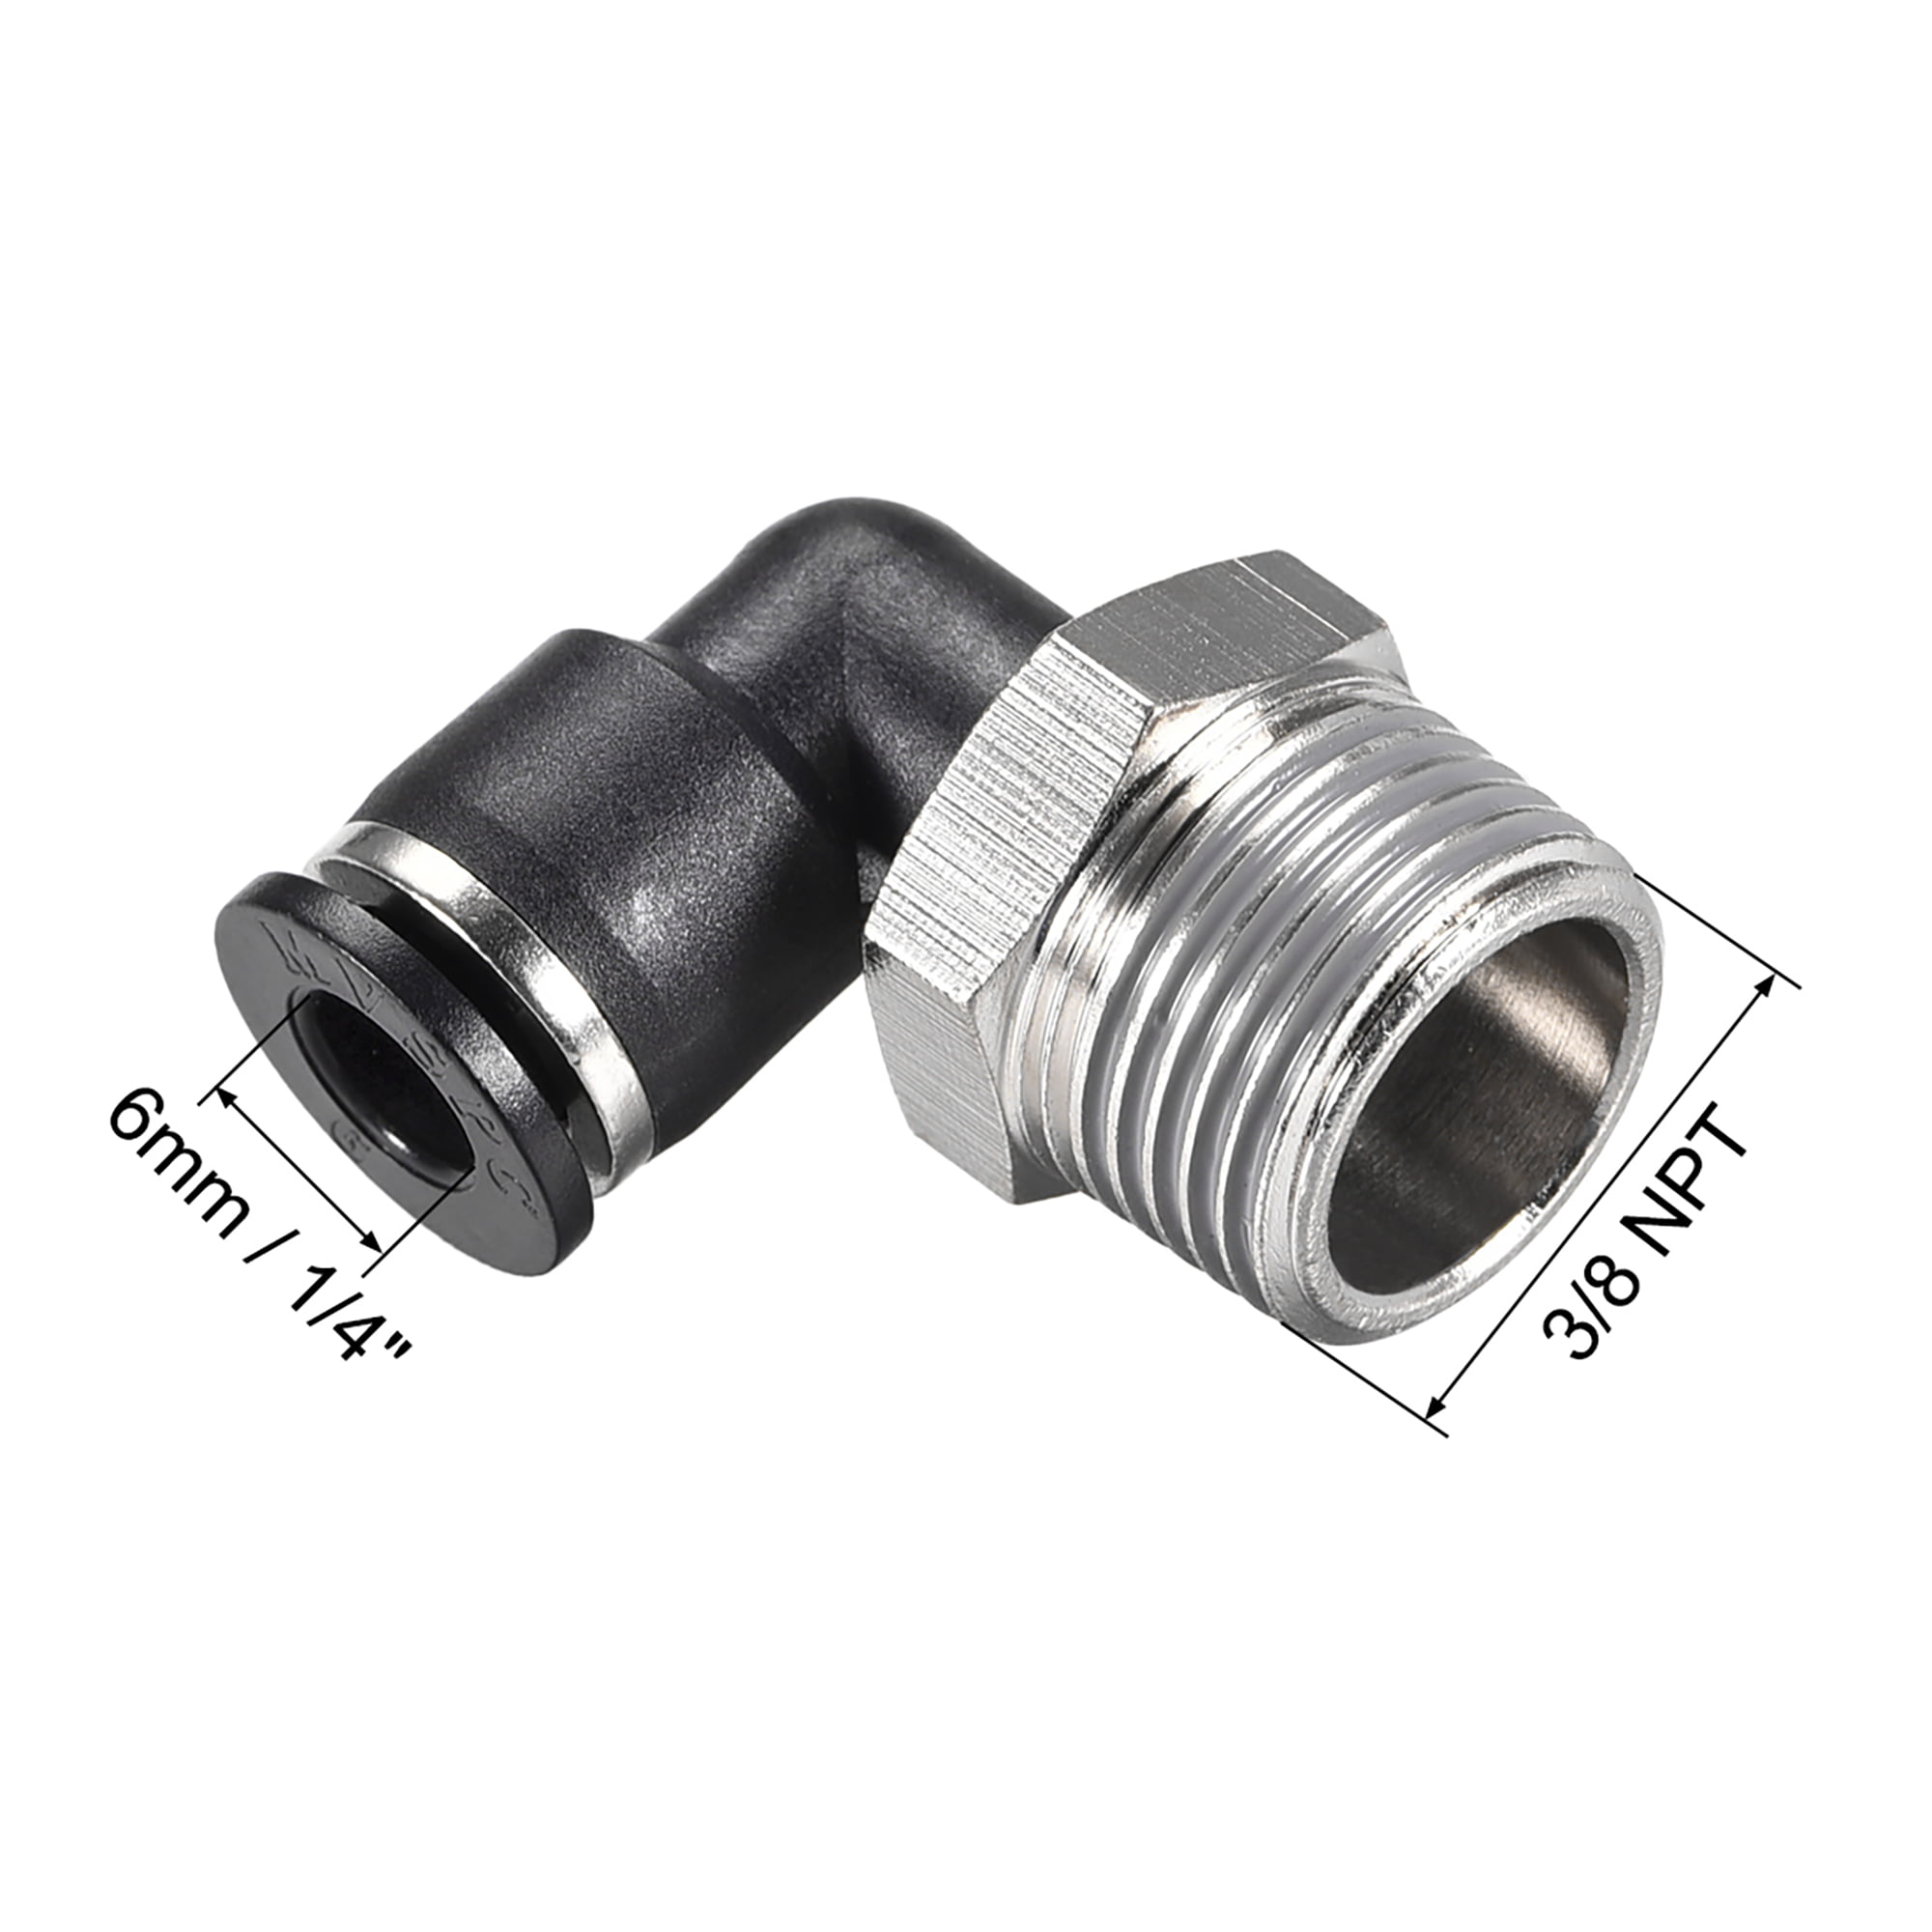 4 Piece Pneumatic Air Quick Push to Connect Fitting 1/4" OD Straight Tube 6mm 